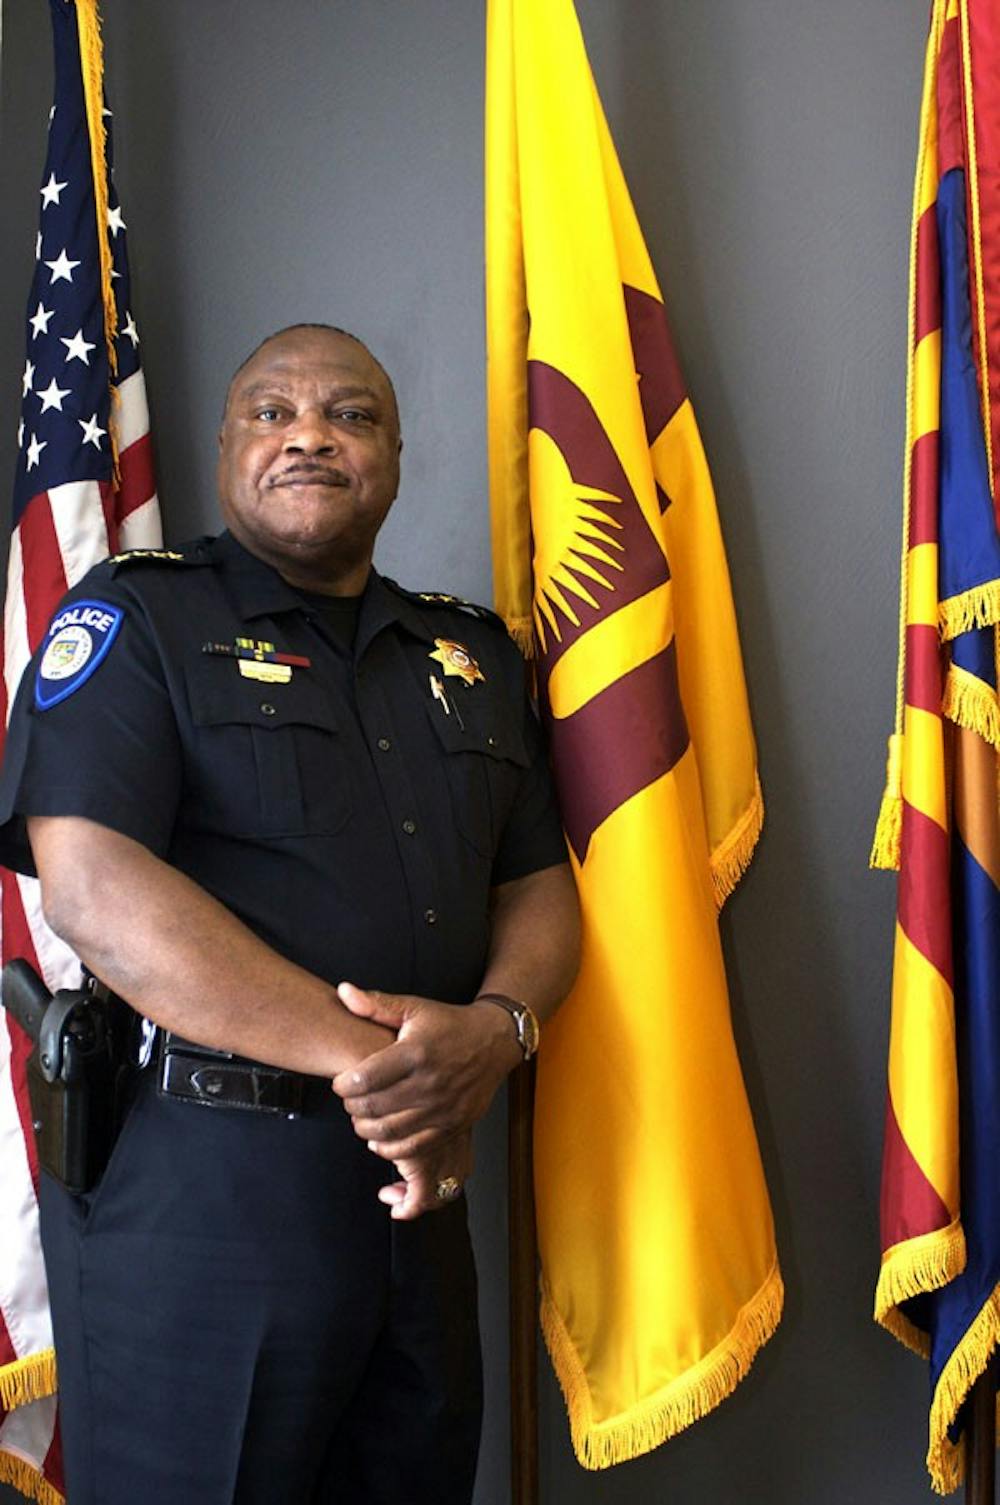 10-YEAR VET: ASU's Chief of Police, John L. Pickens, has headed the department for a decade. He has overseen many changes to the department over his tenure. (Photo by Scott Stuk)